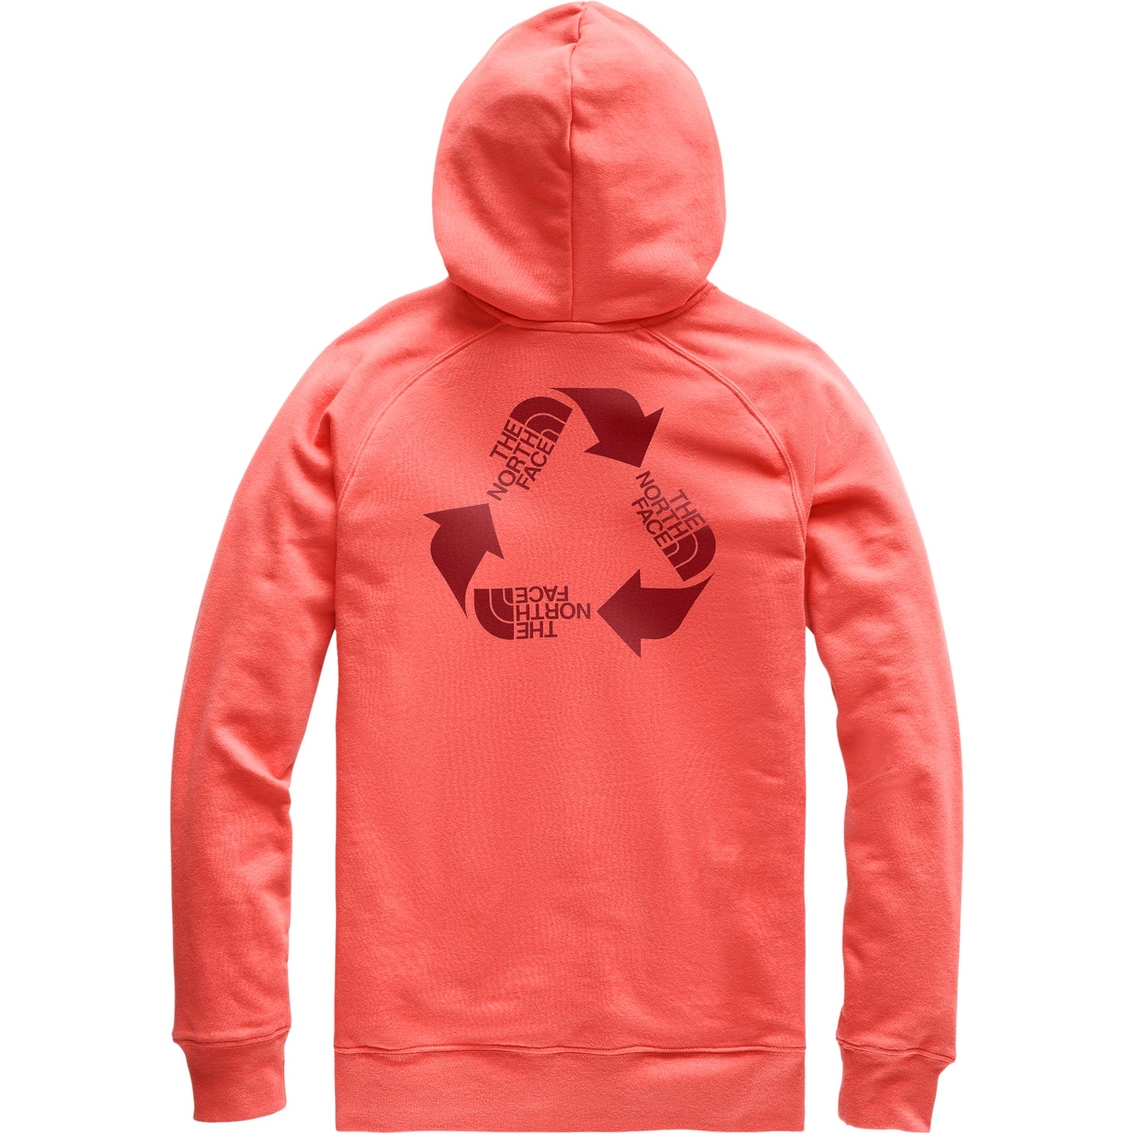 The North Face Bottle Source Hoodie - Image 2 of 2